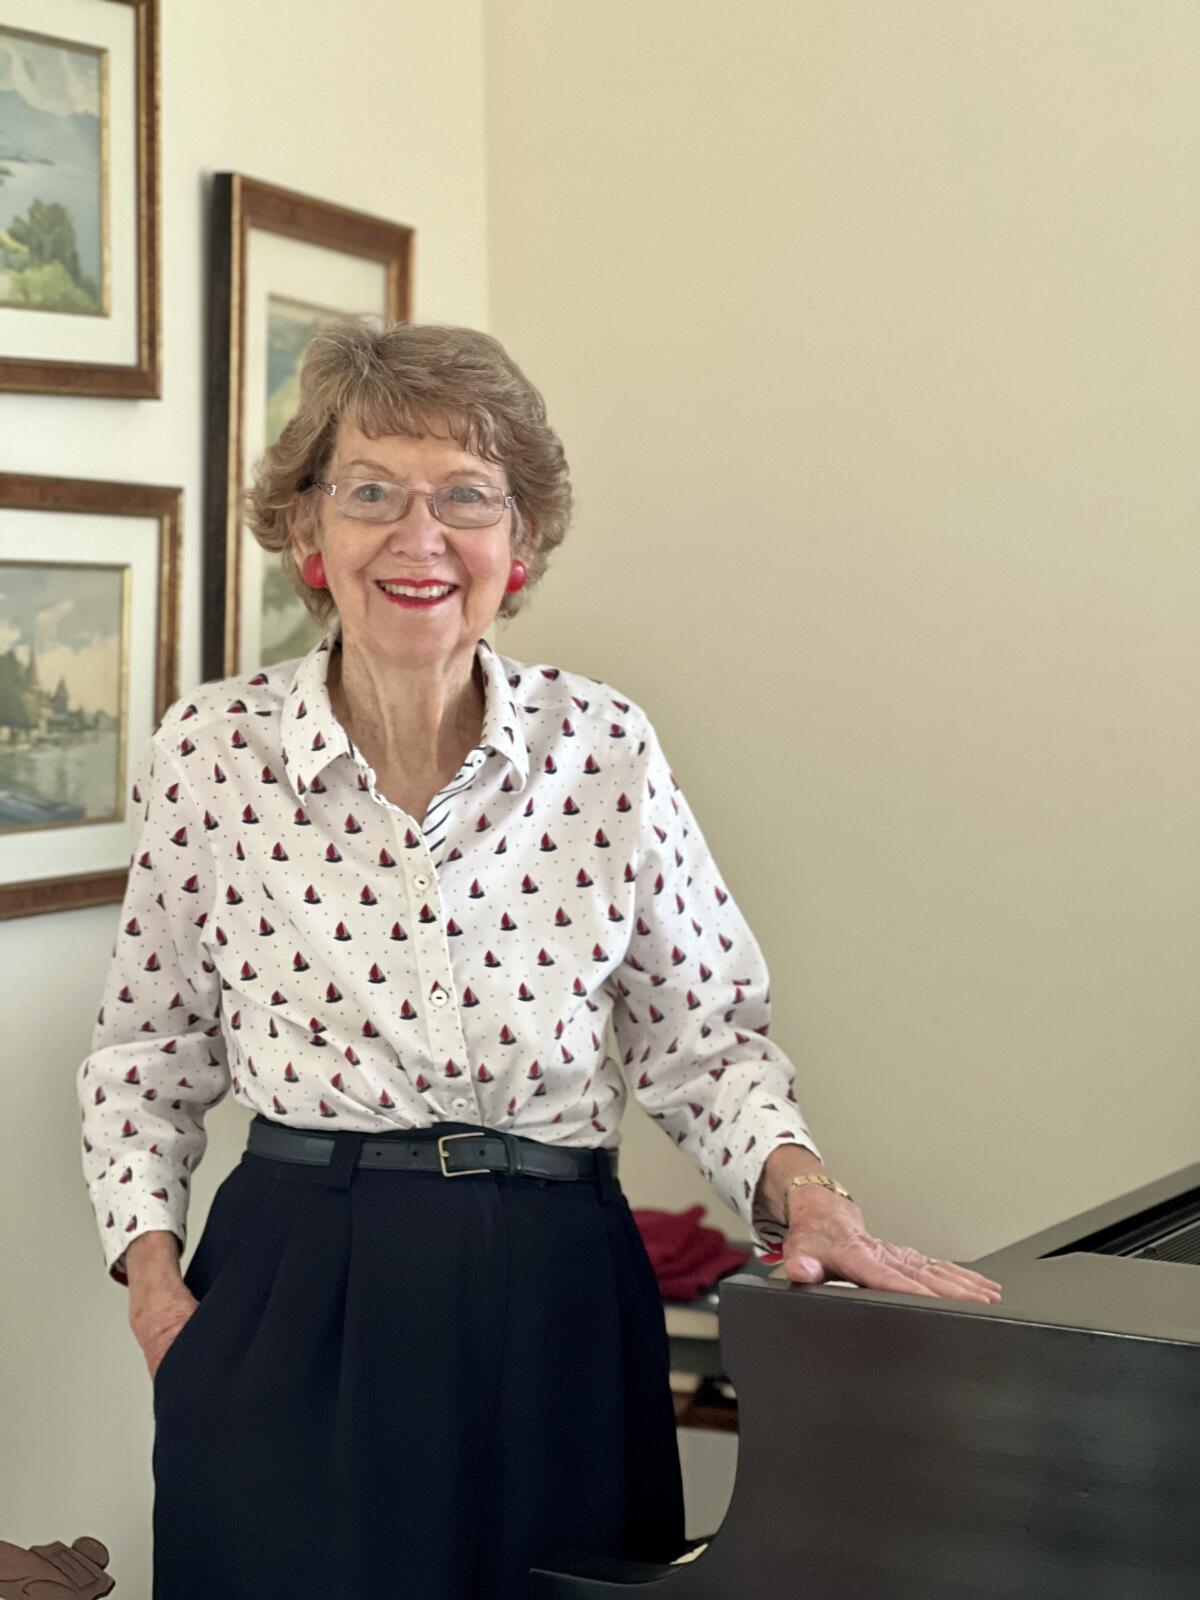 La Jolla resident Ann Marie Haney has volunteered for decades to improve music education in San Diego public schools.